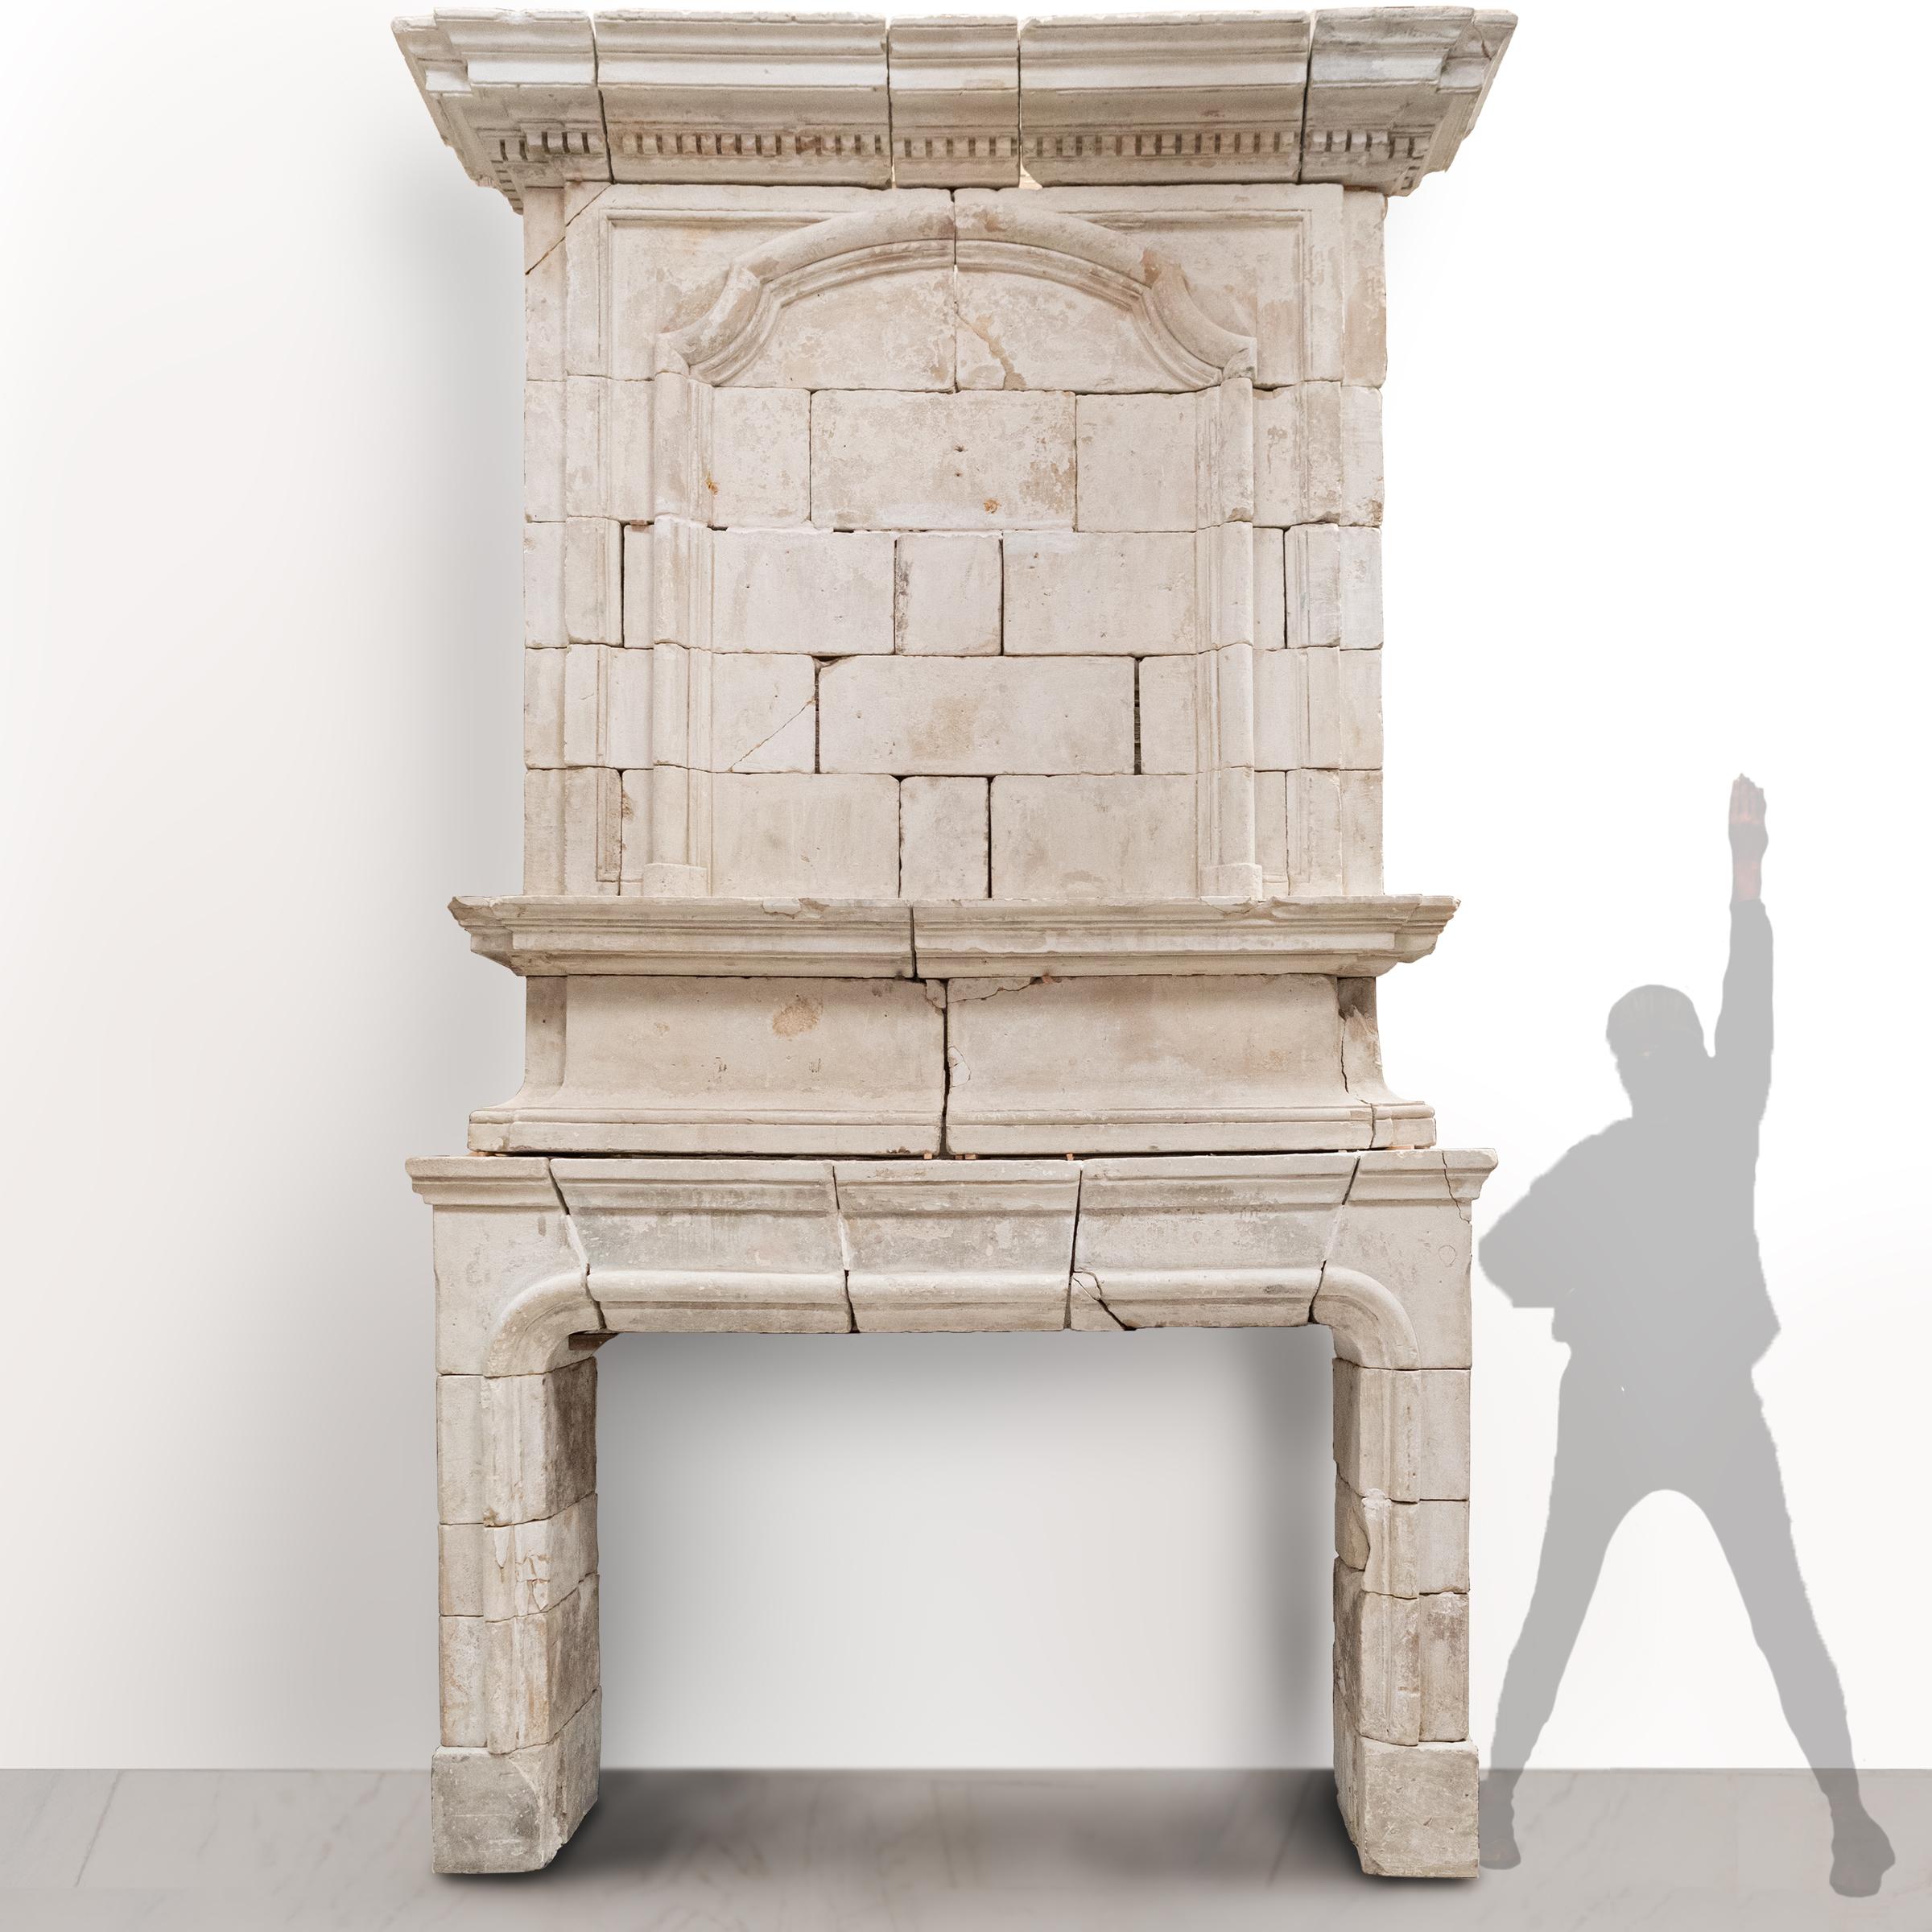 An original French early 18th Century Antique stone fire surround. 

Of significant height, this magnificent period piece is composed of blocks of pale honey-coloured French stone and has a striking trumeau that is surmounted by a stepped and